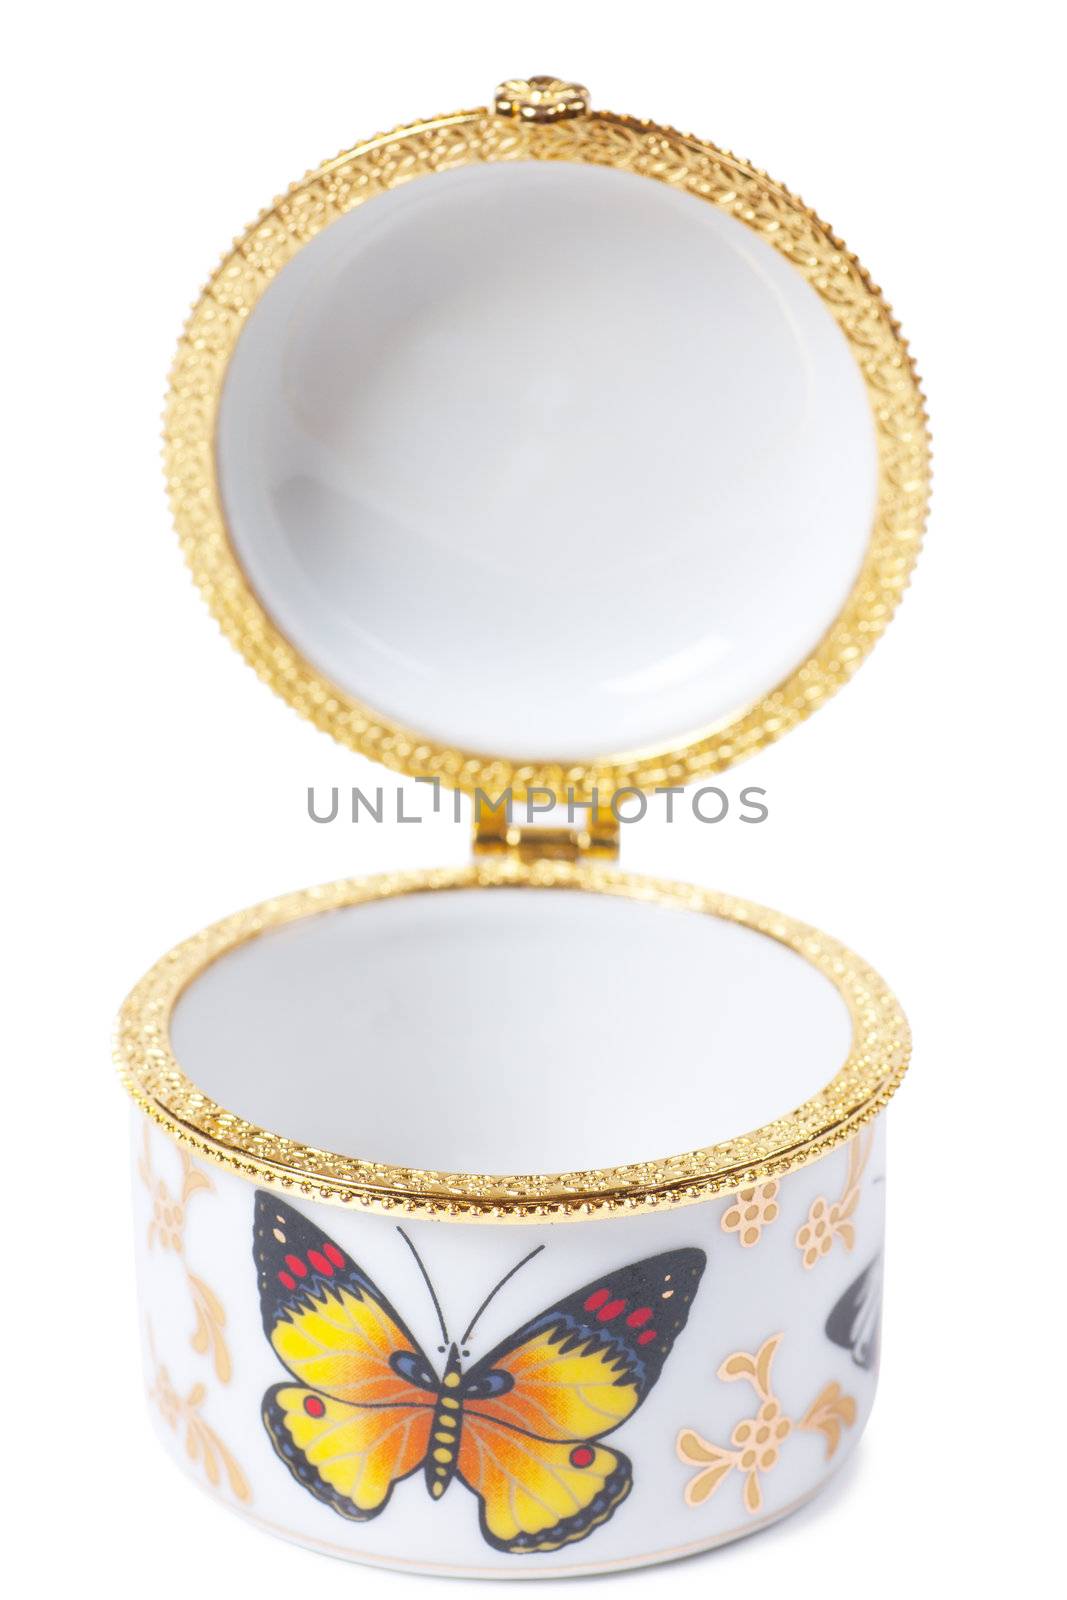 White porcelain box for jewelry on the white background